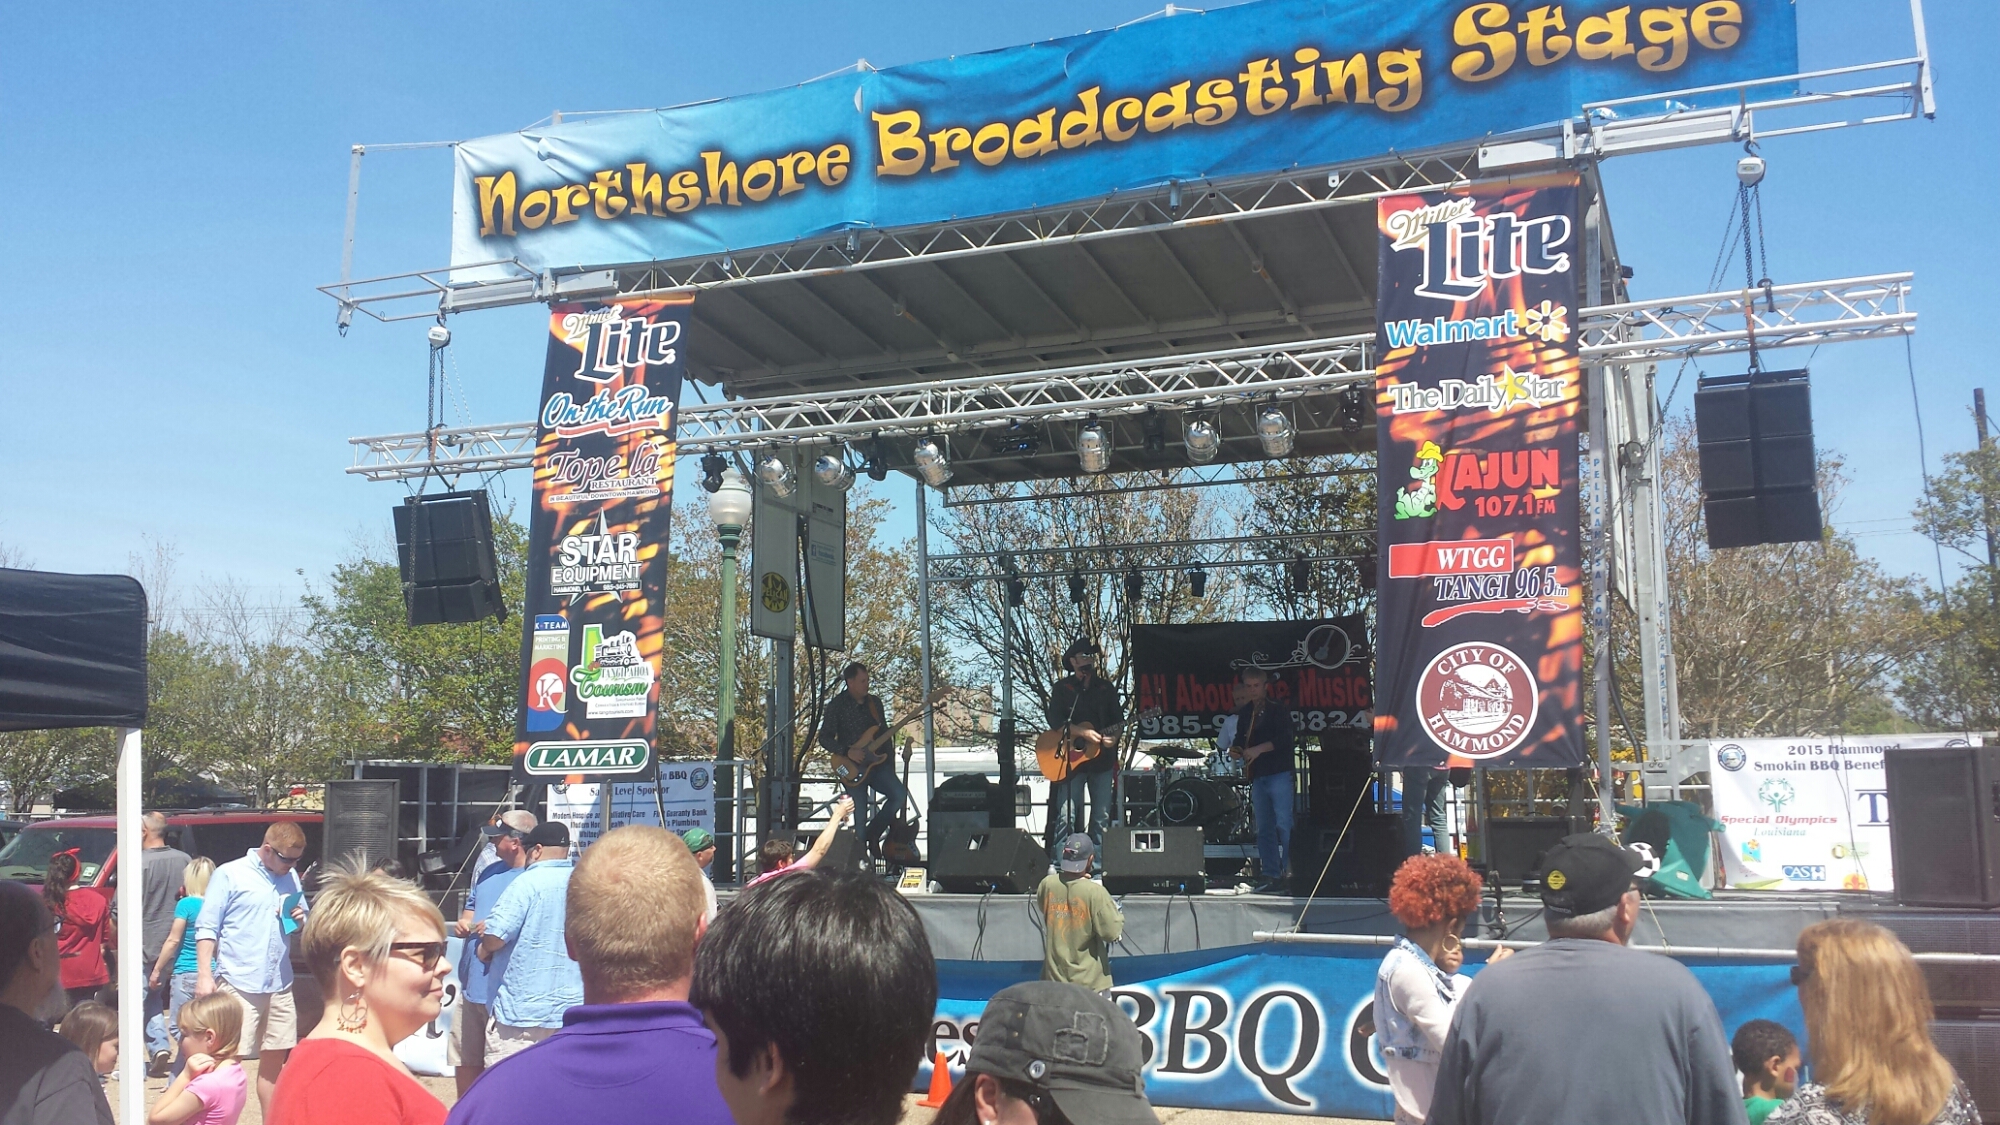 a stage with a five piece band and a banner on top "Northshore Broadcasting Stage"